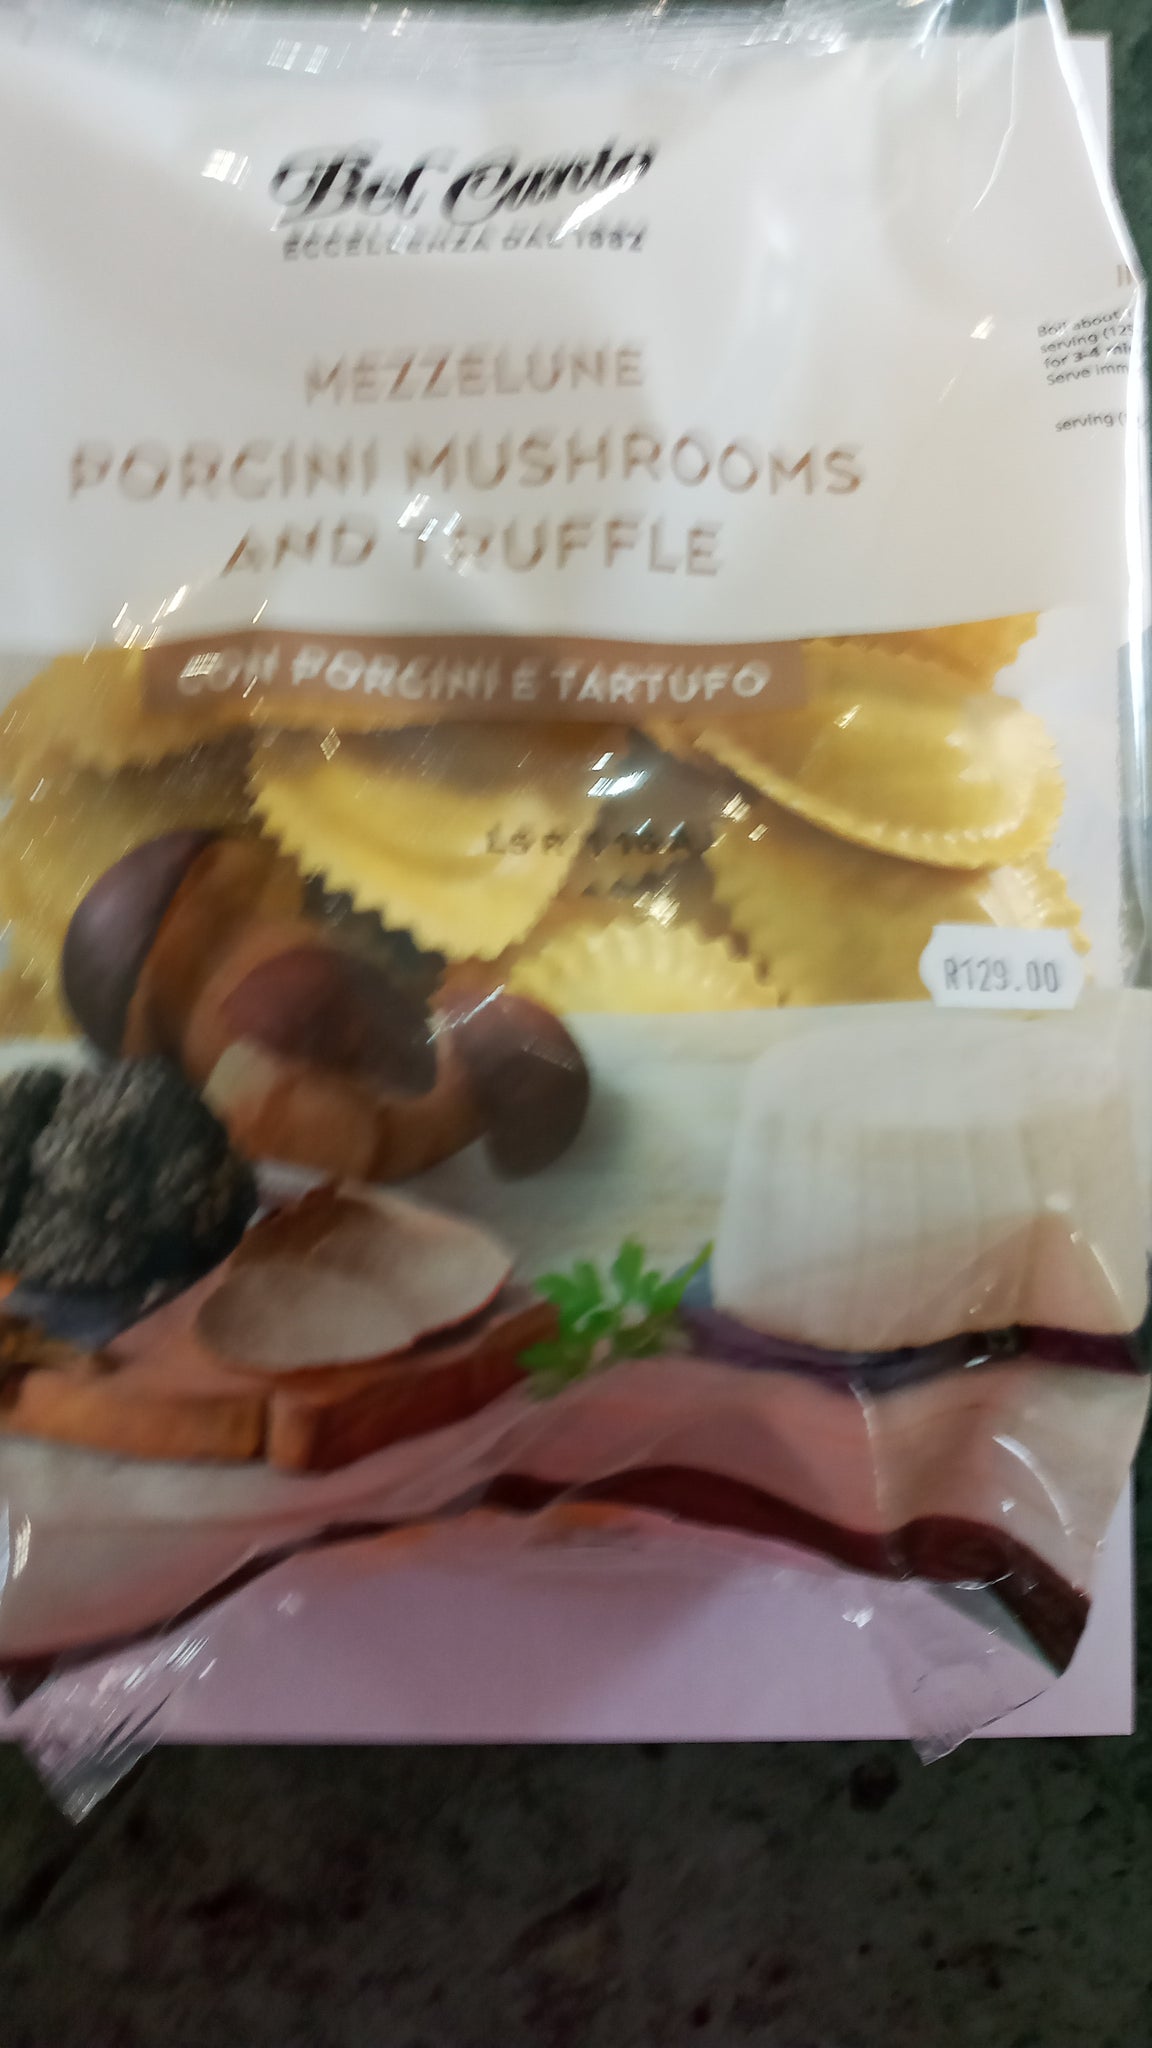 Bel Canto Frozen Porcini and Tartufo Mezzelune 500g (In store collection)